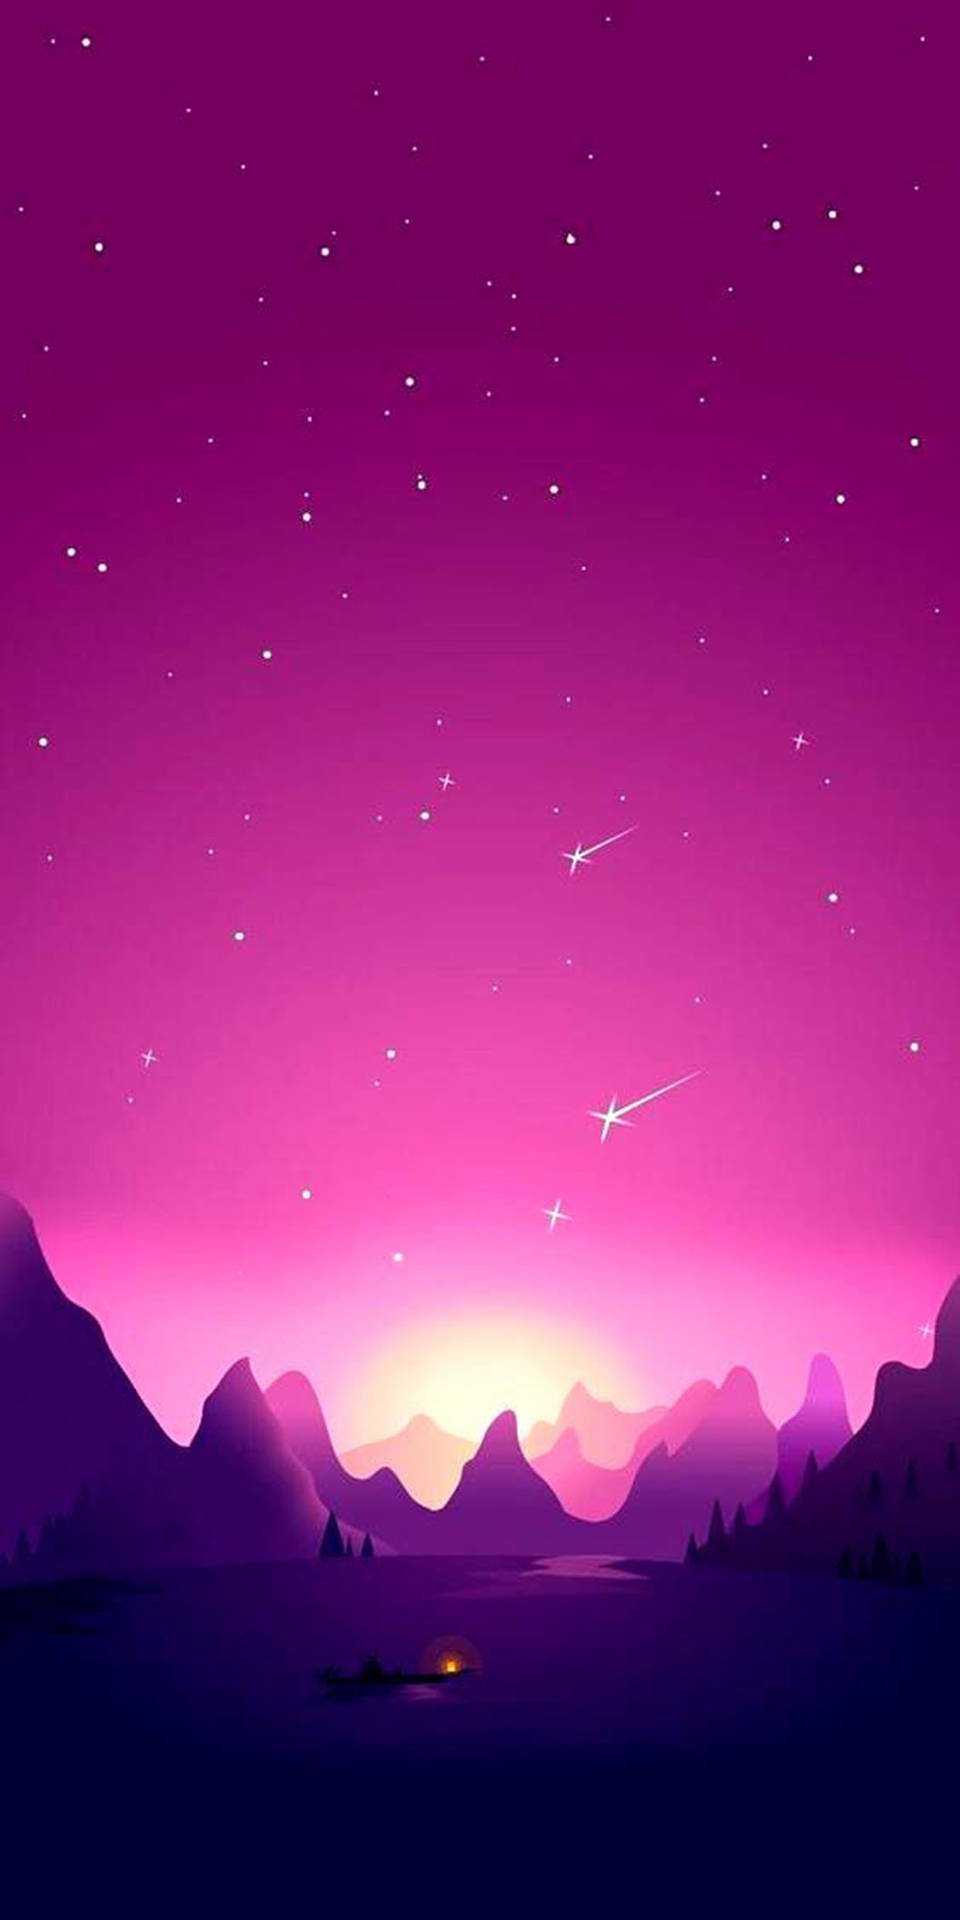 Starry Violet Sky Minimalist Android Wallpaper